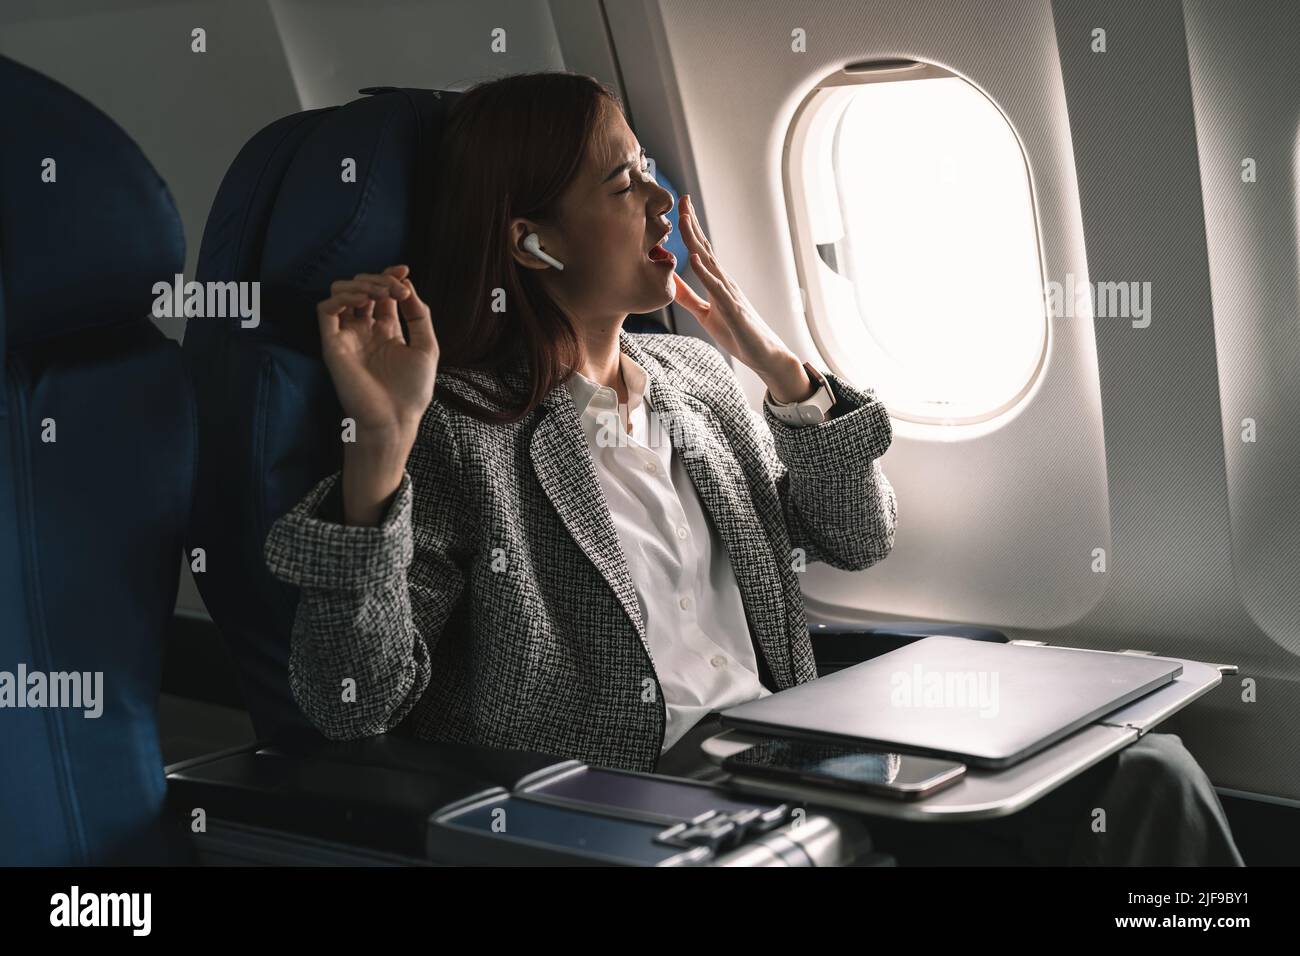 Sleepy and tired young asian businesswoman or female entrepreneur yawning feeling sleepy during a business flight to another city. Stock Photo